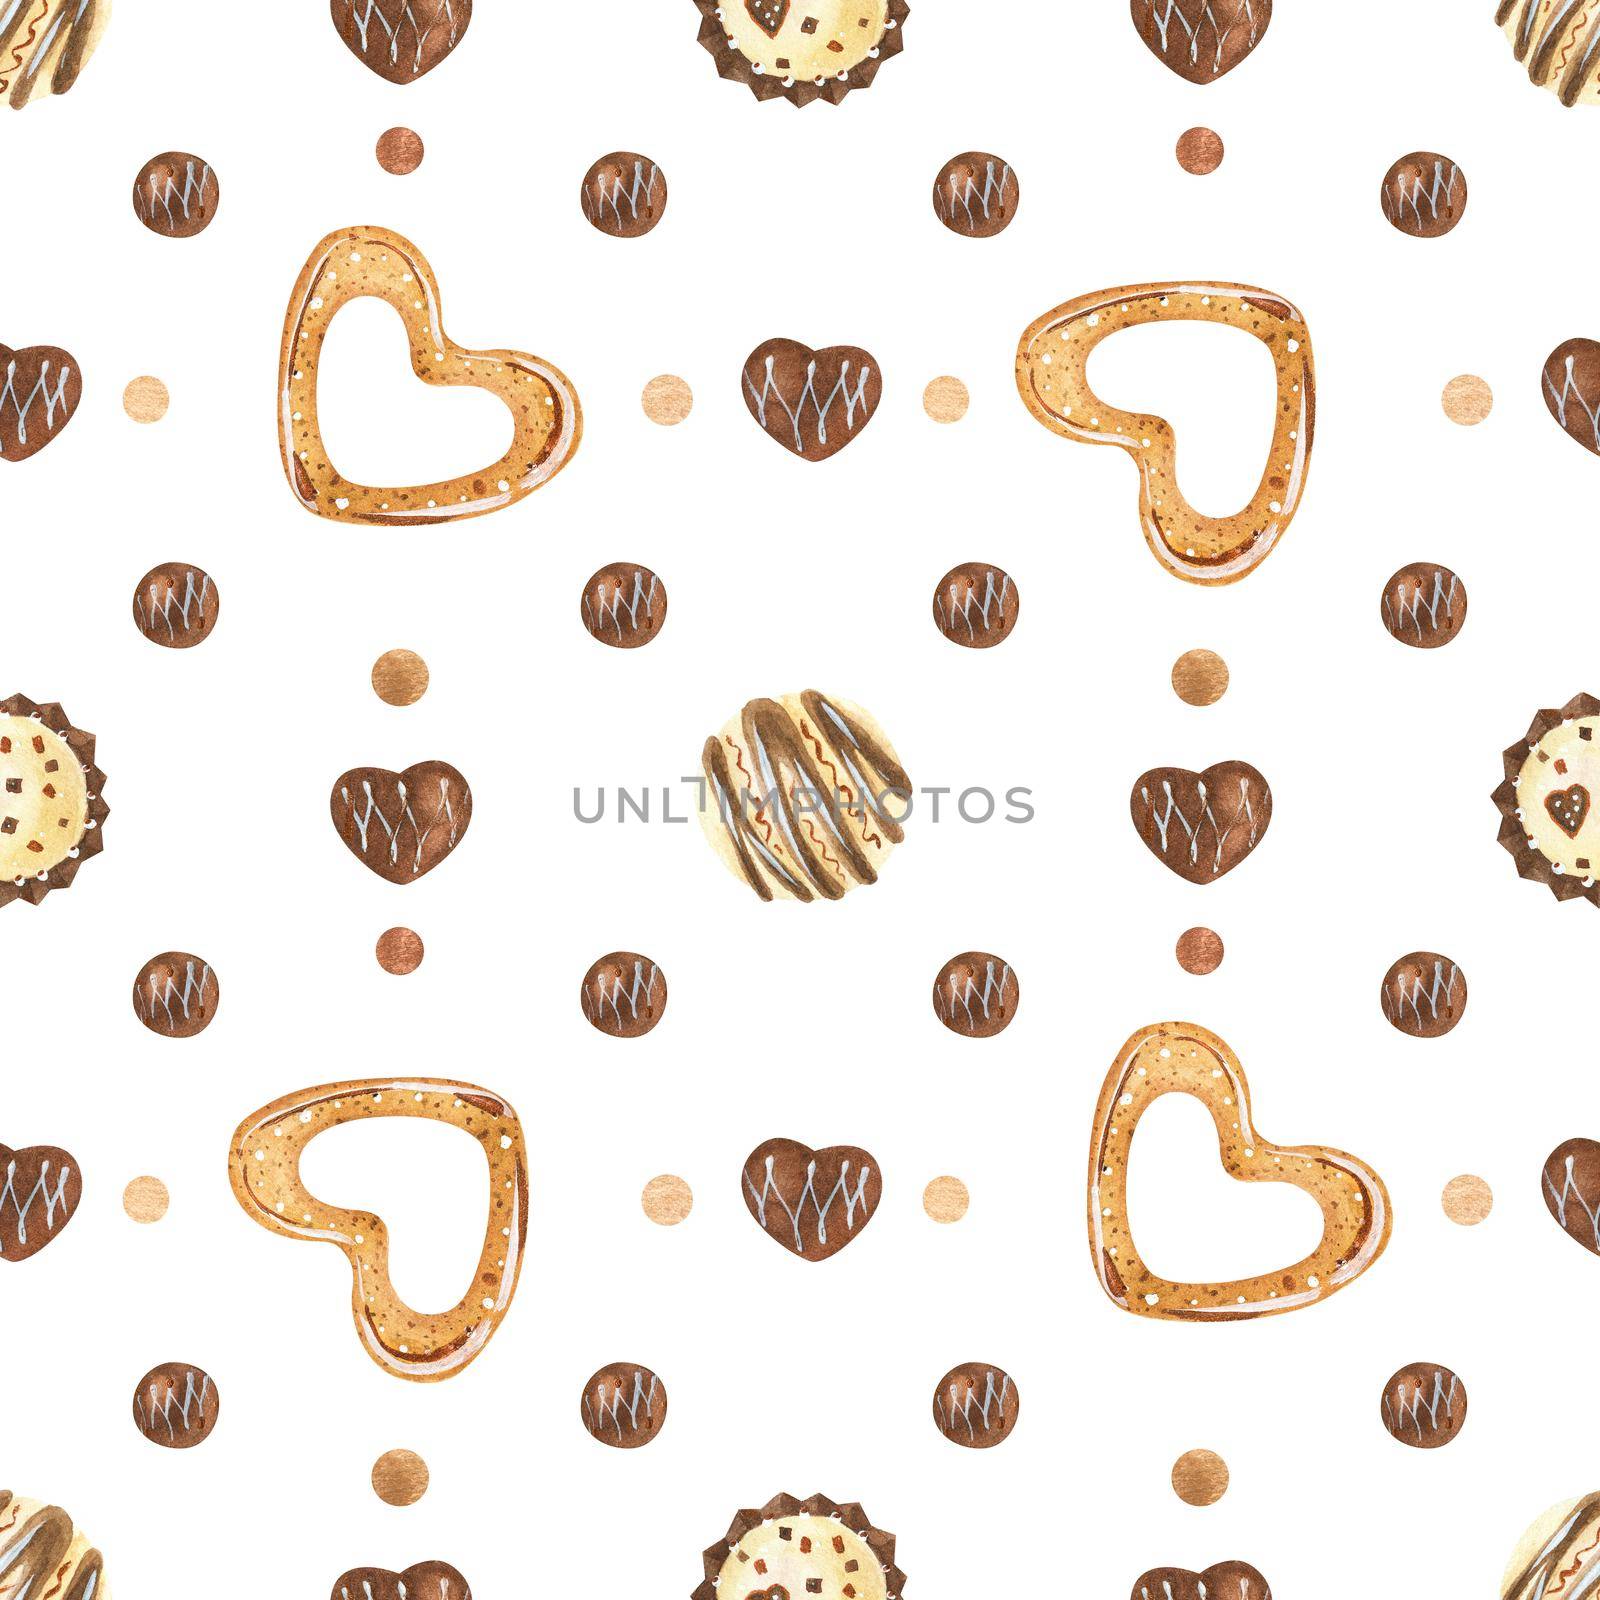 Sweet Valentine seamless pattern with chocolate candies and cookies. Watercolor illustration for any event decoration, white background, path included